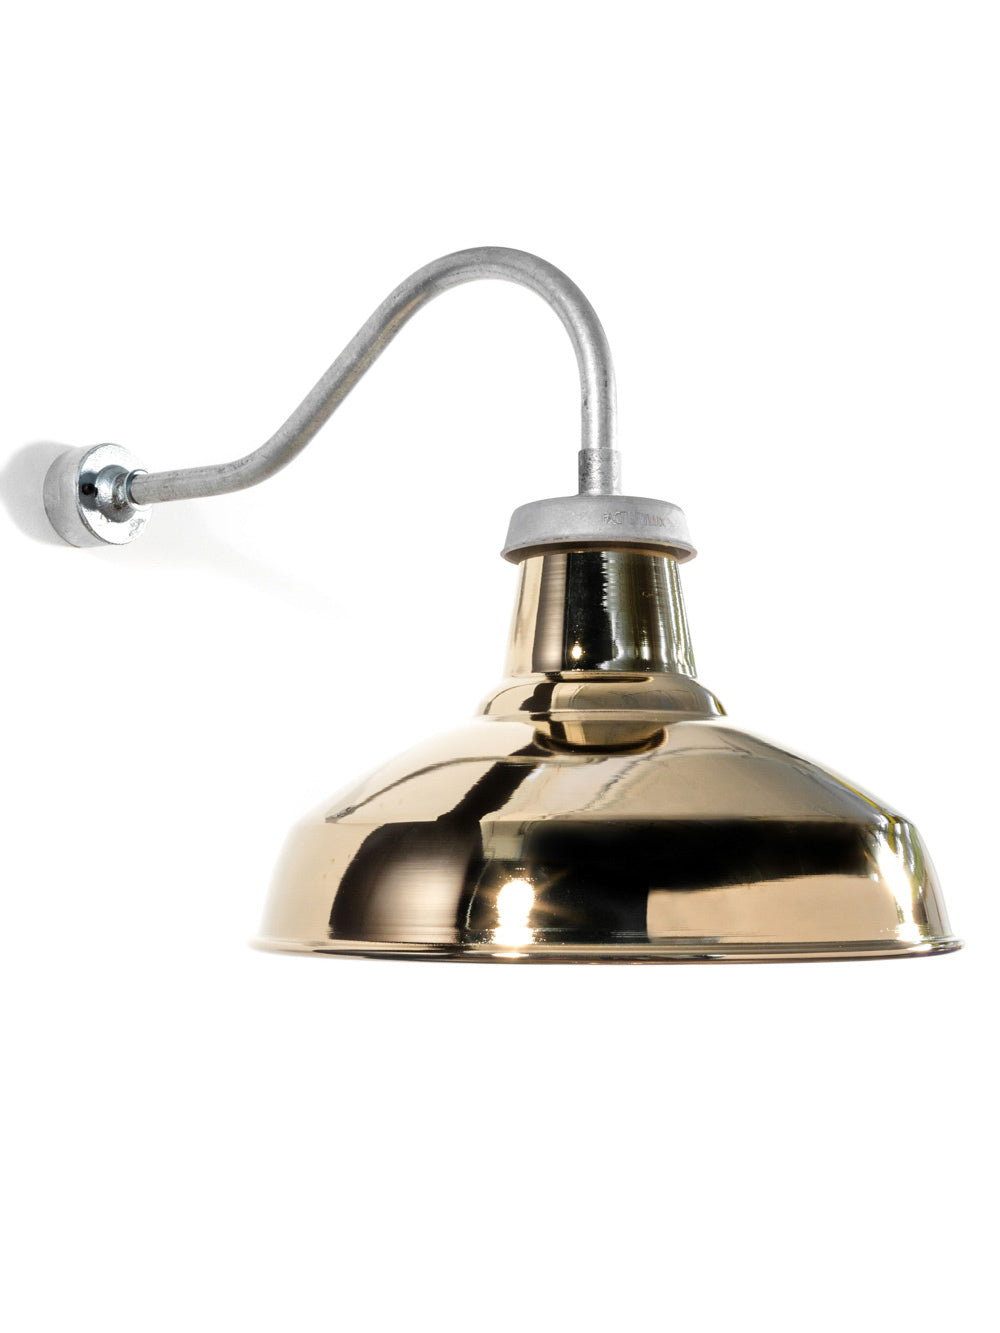 Industrial Swan Neck Light | Gold Shade | End-Of-Line